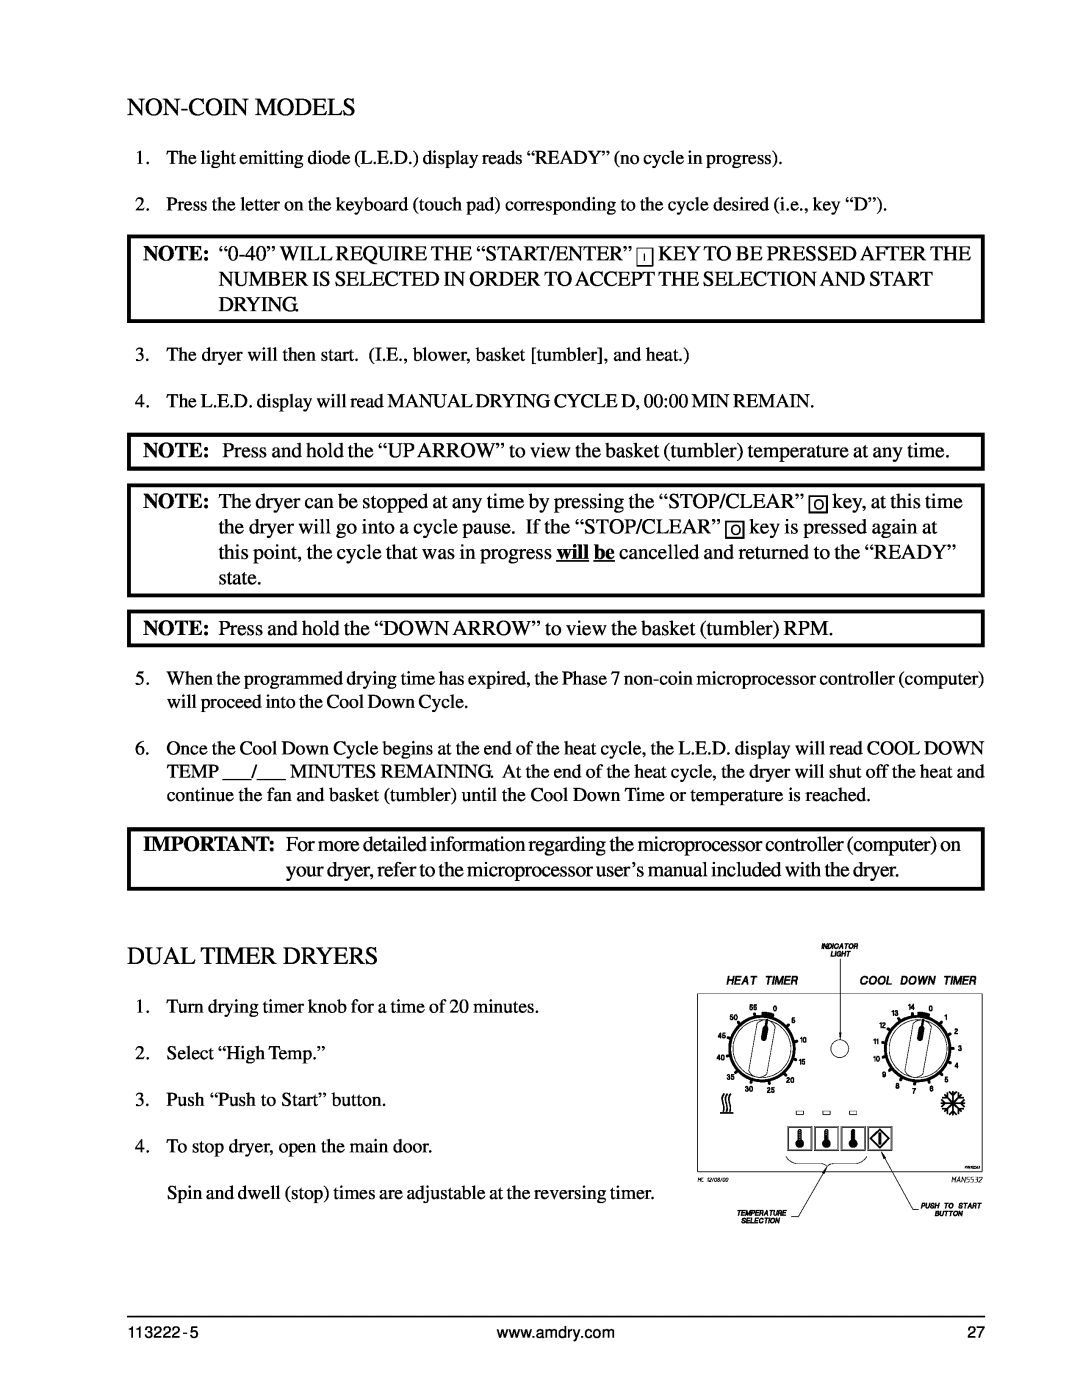 American Dryer Corp AD-24 Phase 7 installation manual Non-Coin Models, Dual Timer Dryers 